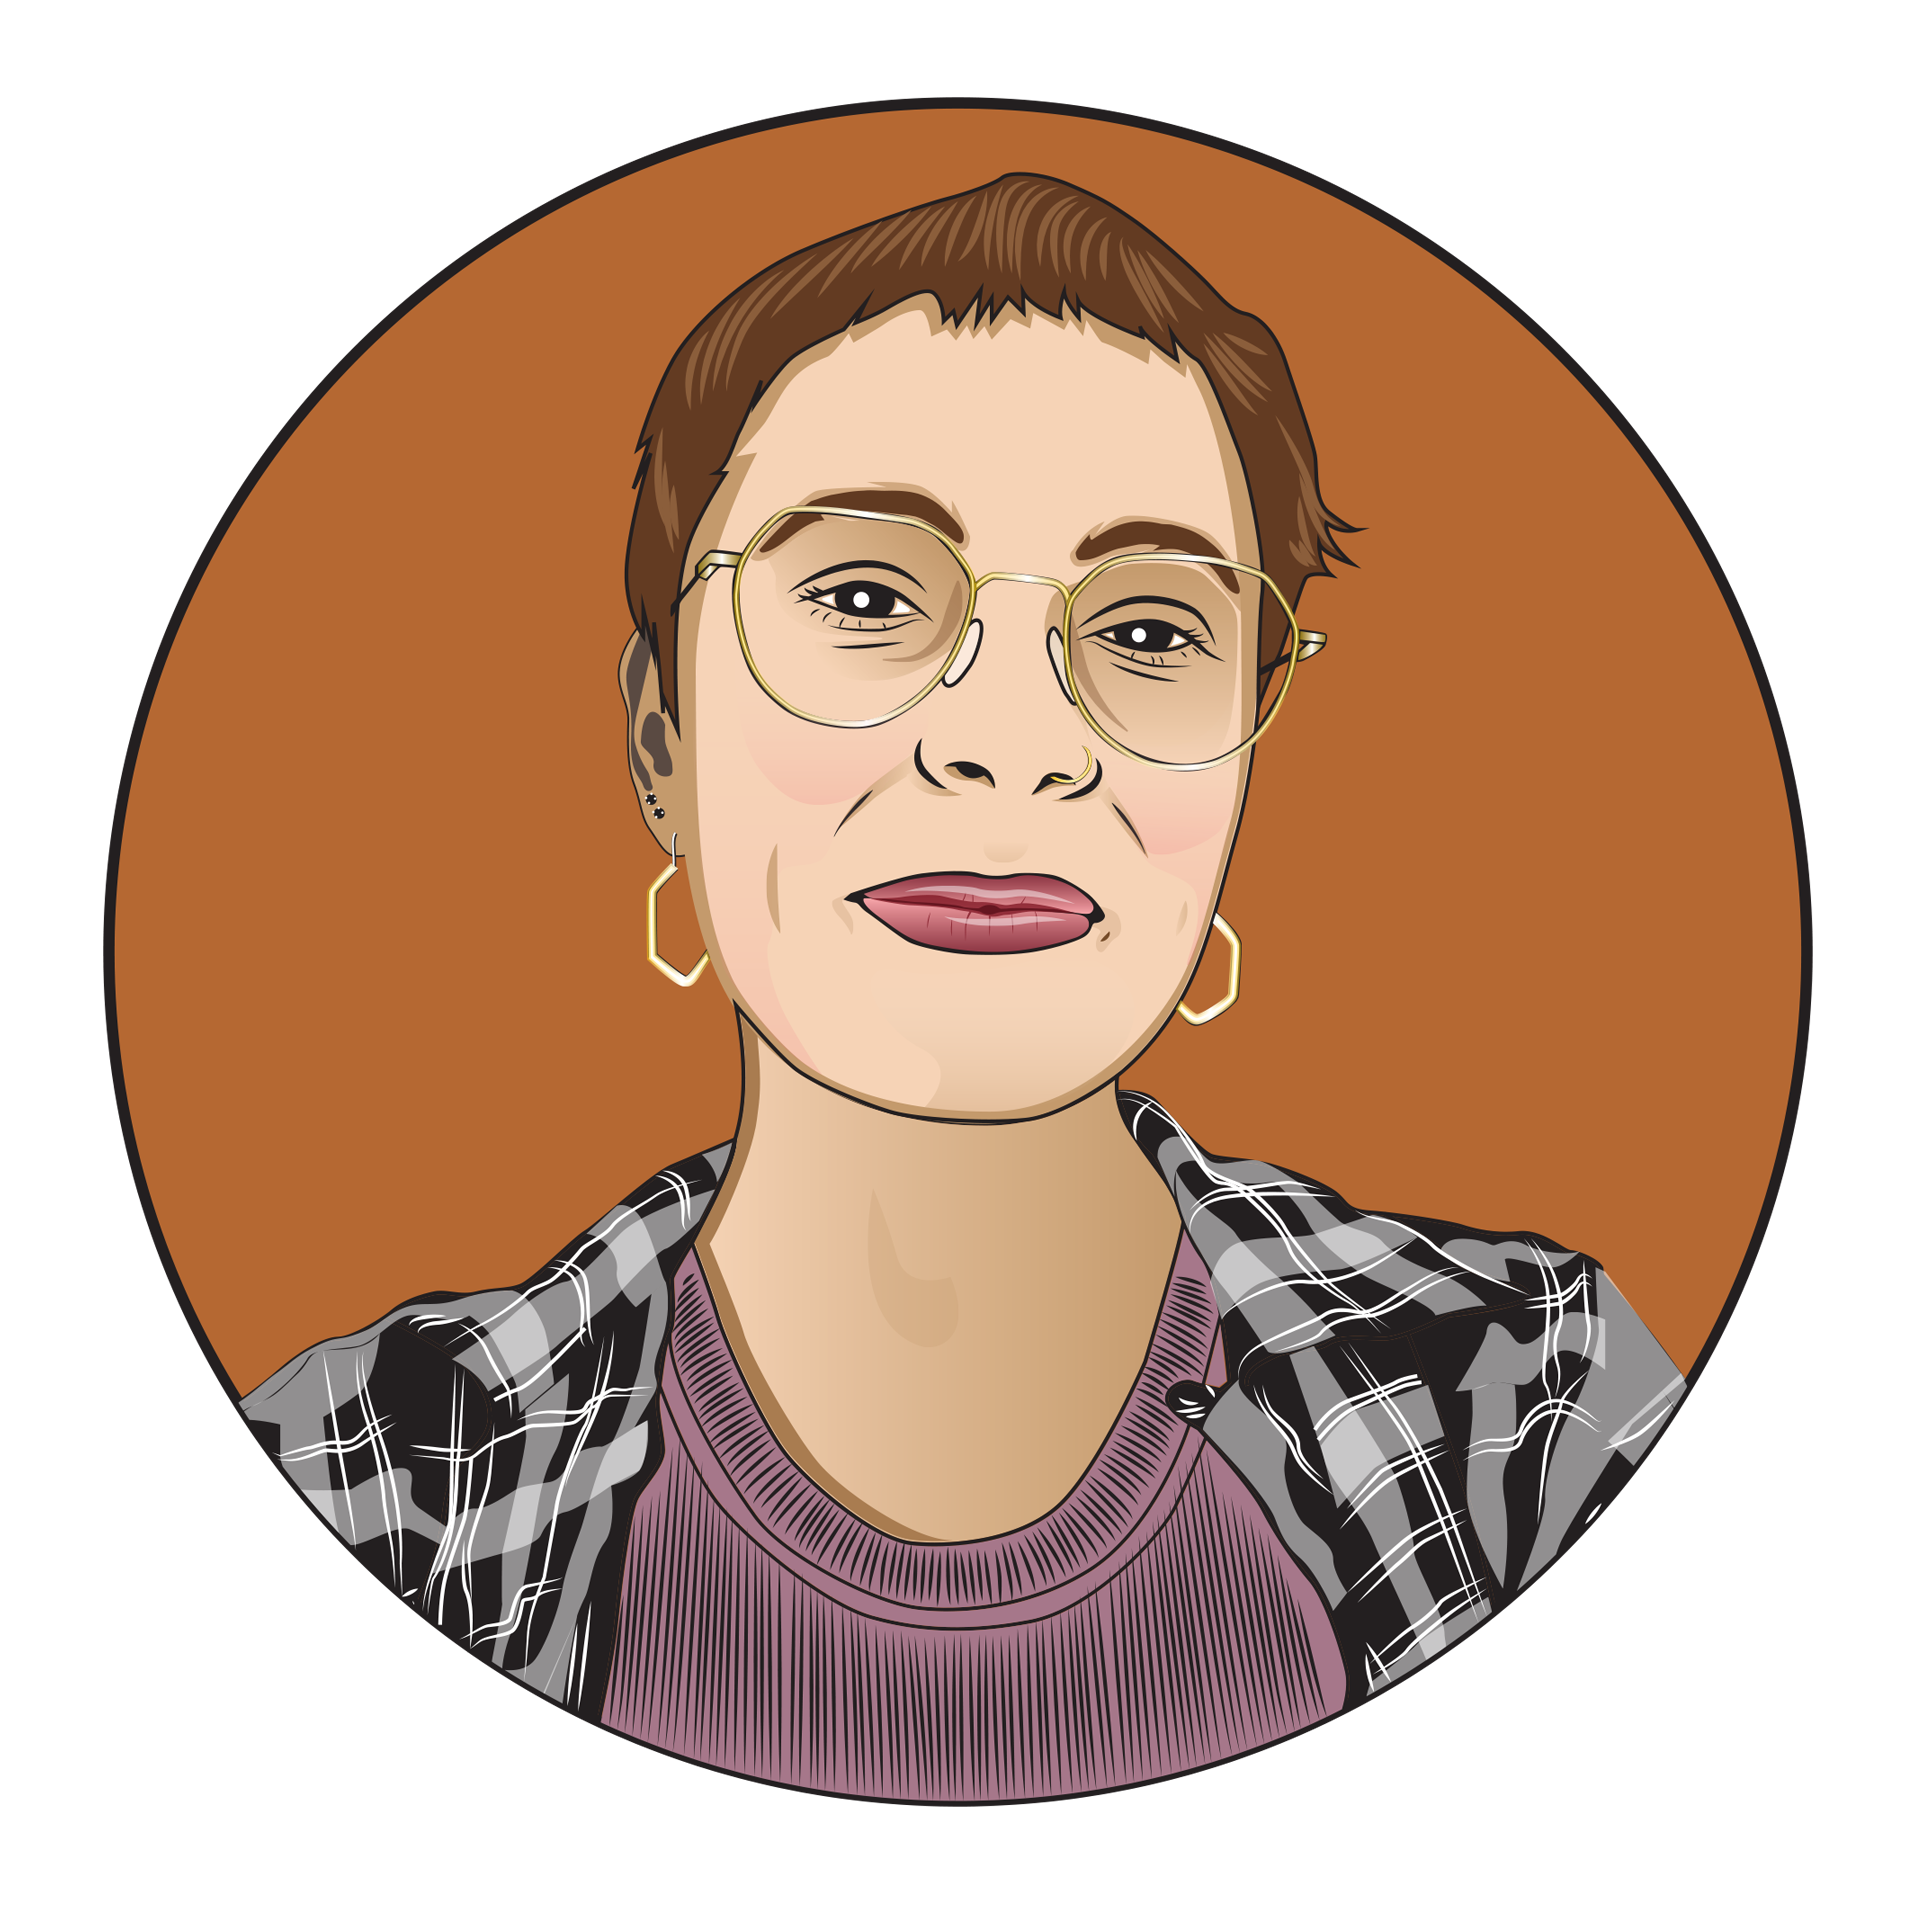 Illustrated image of Sonja wearing gold rimmed glasses, hoop earrings, and pink lipstick. She is also wearing a black and white checkered shirt with a purple shirt underneath it. Her image is on an orange background.